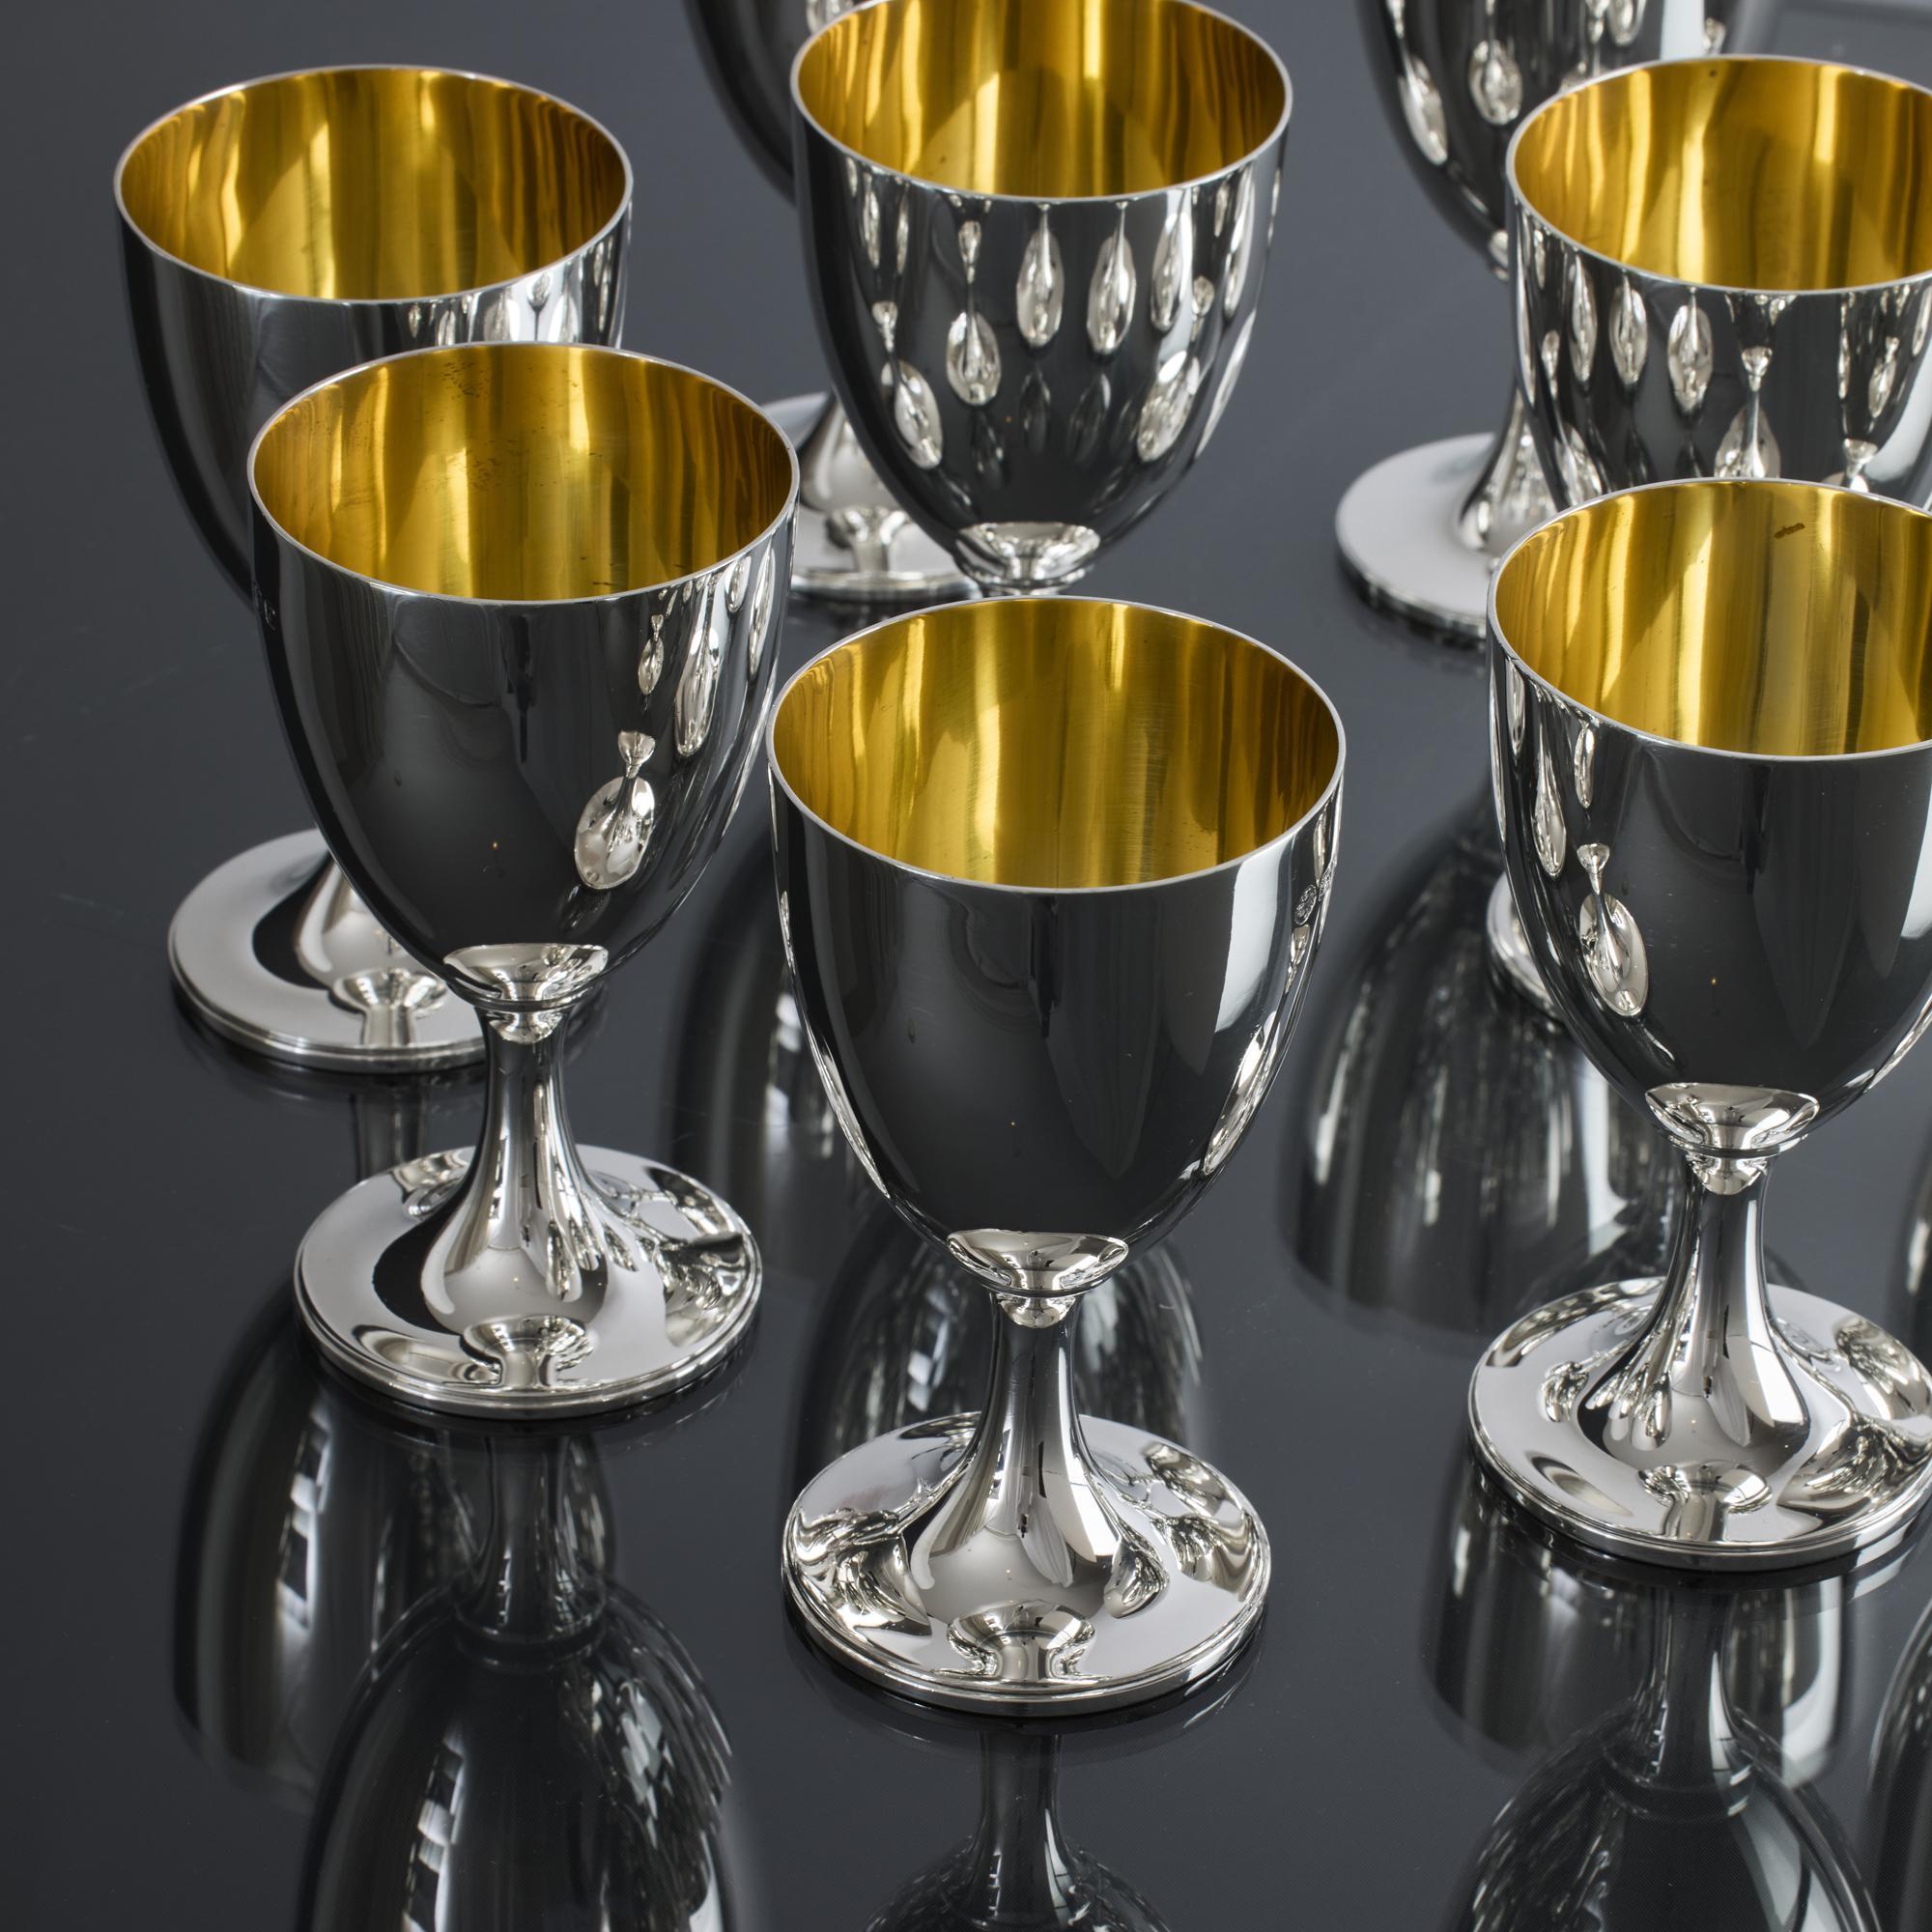 Set of eight 20th century silver goblets created in the George III style and featuring simple, plain round bodies on spreading circular bases. Each goblet's interior is nicely gilded, and the simplicity of these silver goblets lends them to being